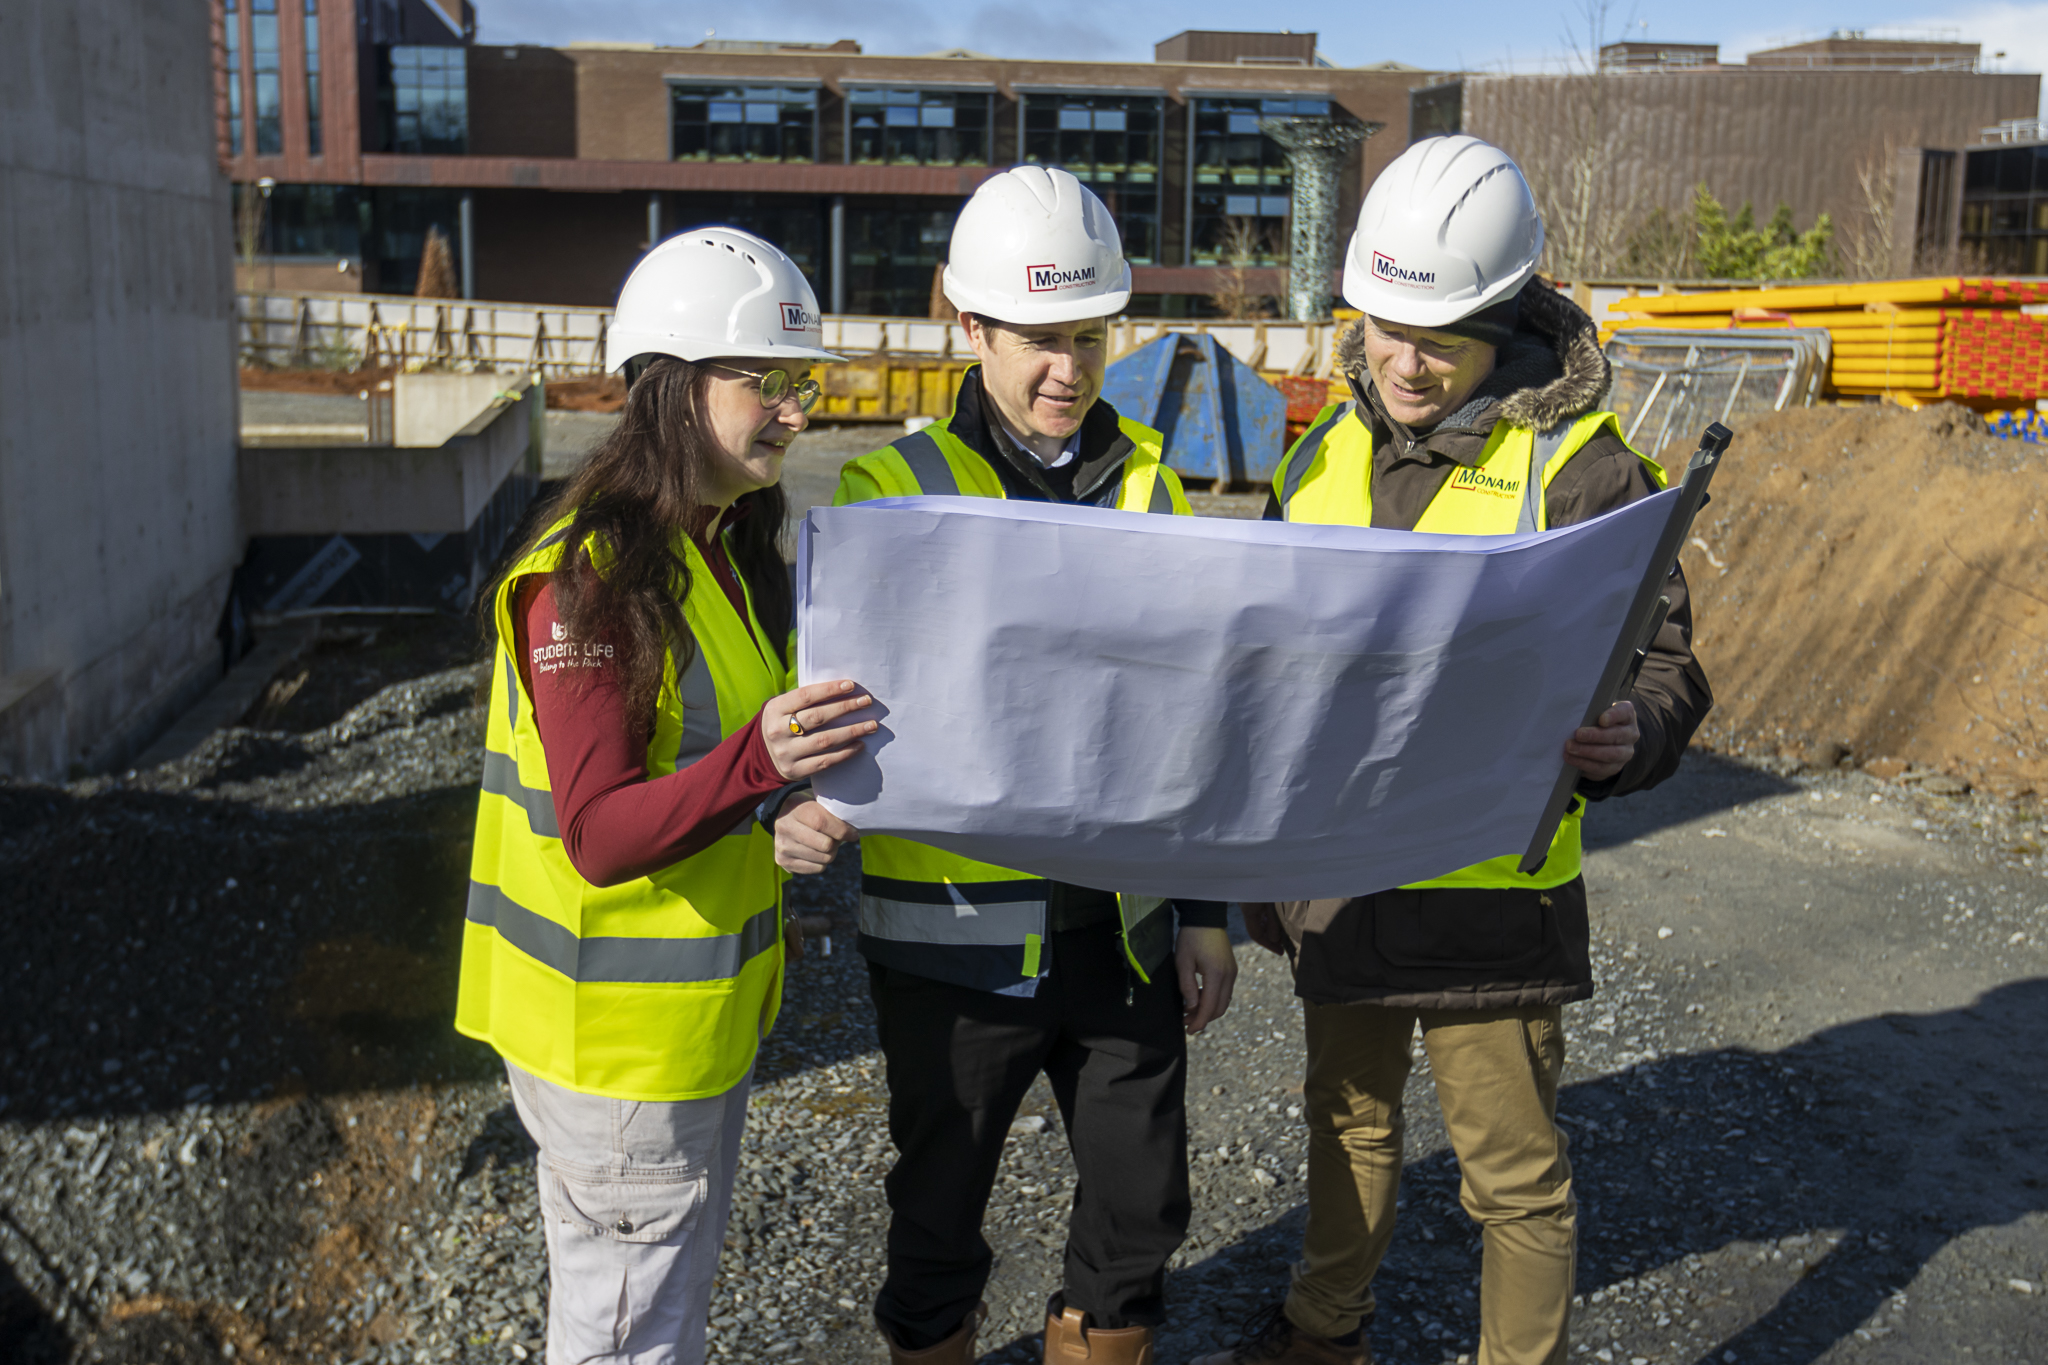 REPRO FREE Maeve Gilmore, Deputy Student President, Trevor Cavanagh, Regional Director Monami and Patrick Ryan, UL Associate Vice President Student Engagement looking at plans for the new Student Centre at UL